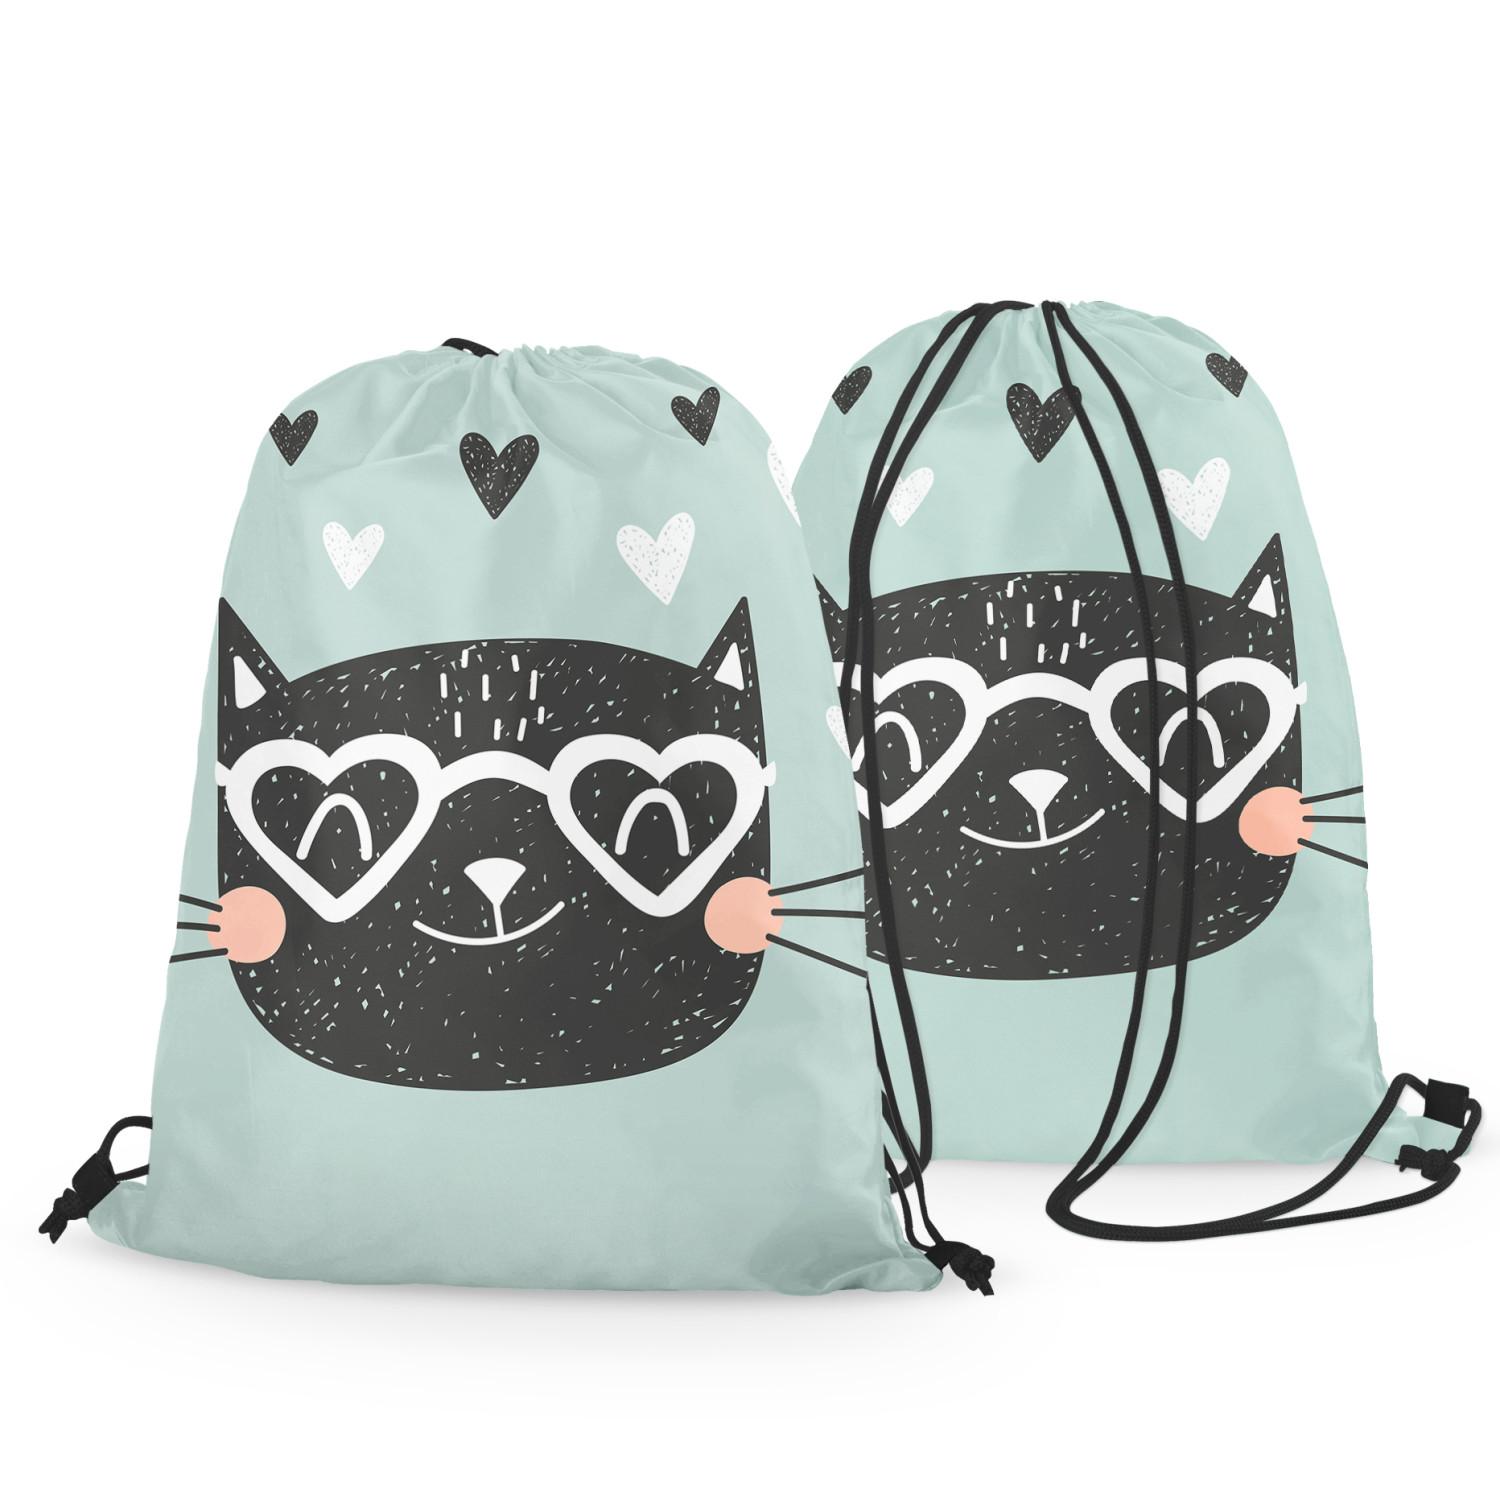 Backpack Cat in love - animal and hearts held in shades of white and black